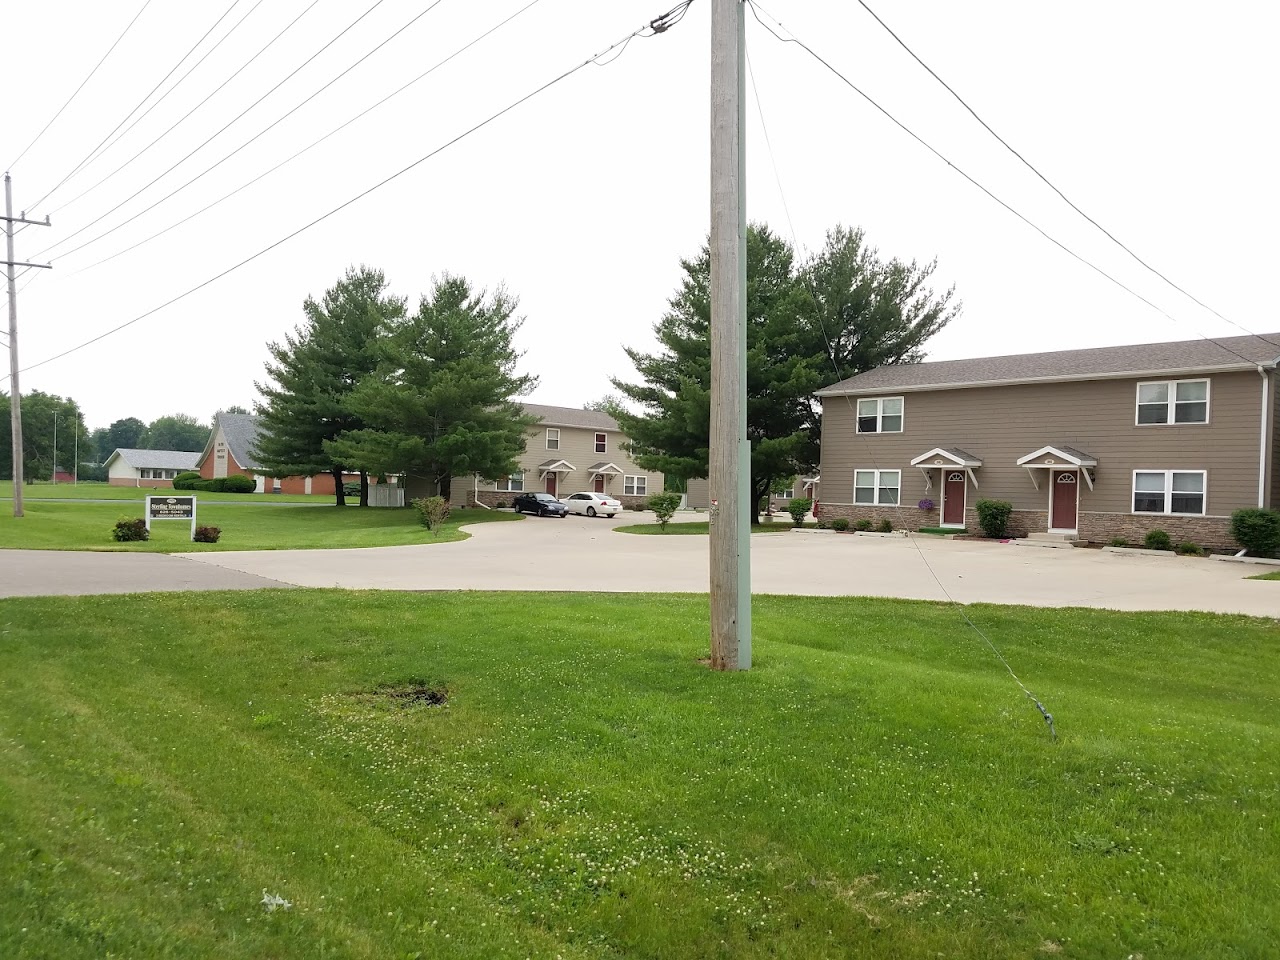 Photo of DD DEVELOPMENT OF STERLING I at 2105 FREEPORT RD STERLING, IL 61081